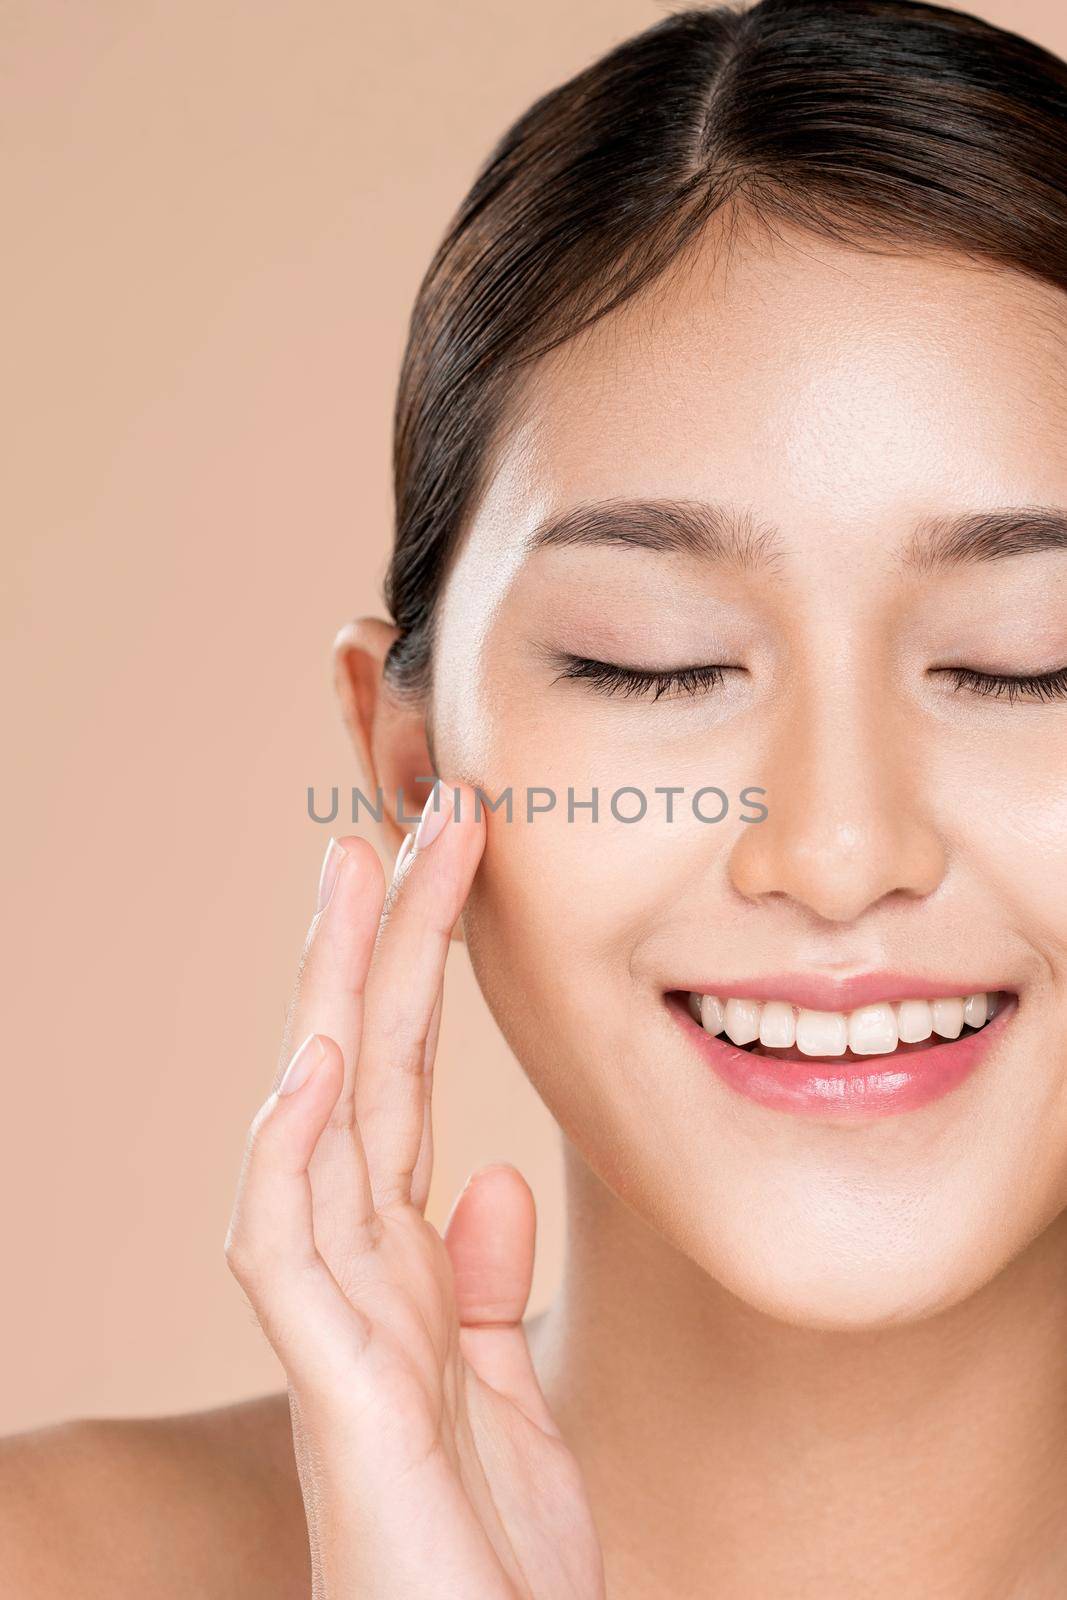 Closeup ardent young woman posing beauty gesture with clean fresh skin. by biancoblue